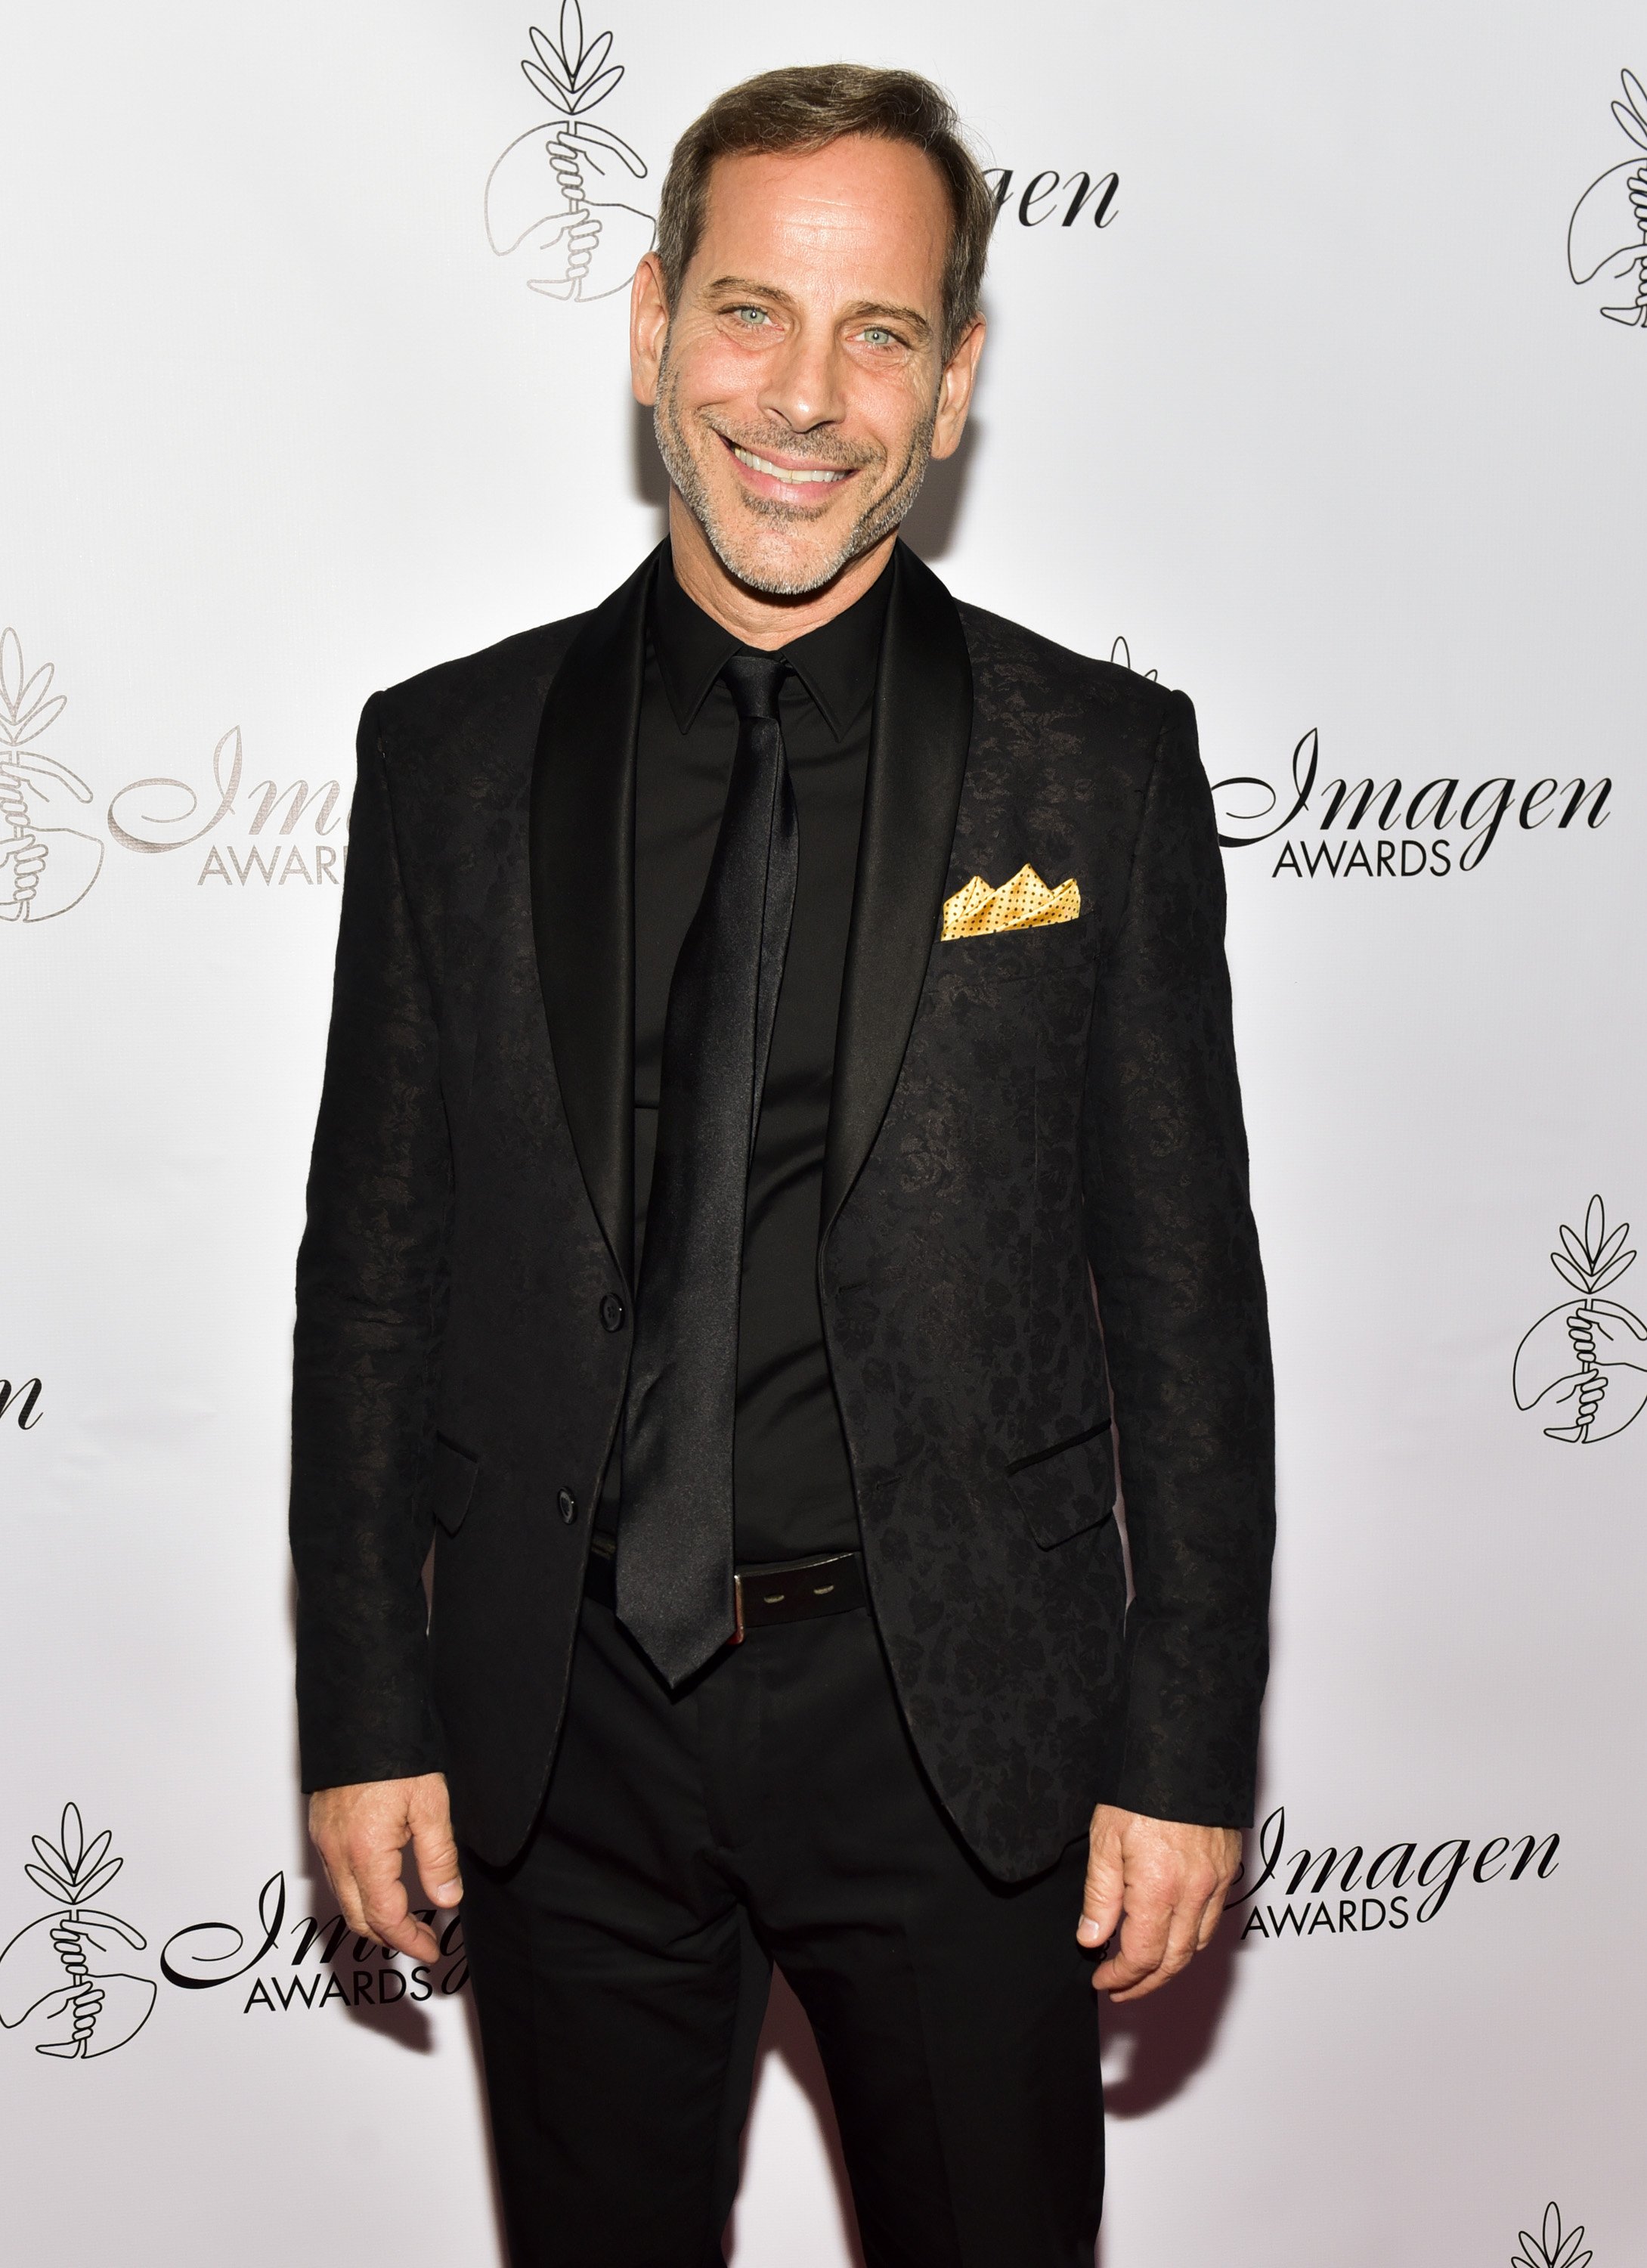 Emanuel Gironi poses at the 33rd Annual Imagen Awards at JW Marriott Los Angeles at L.A. LIVE on August 25, 2018, in Los Angeles, California | Source: Getty Images